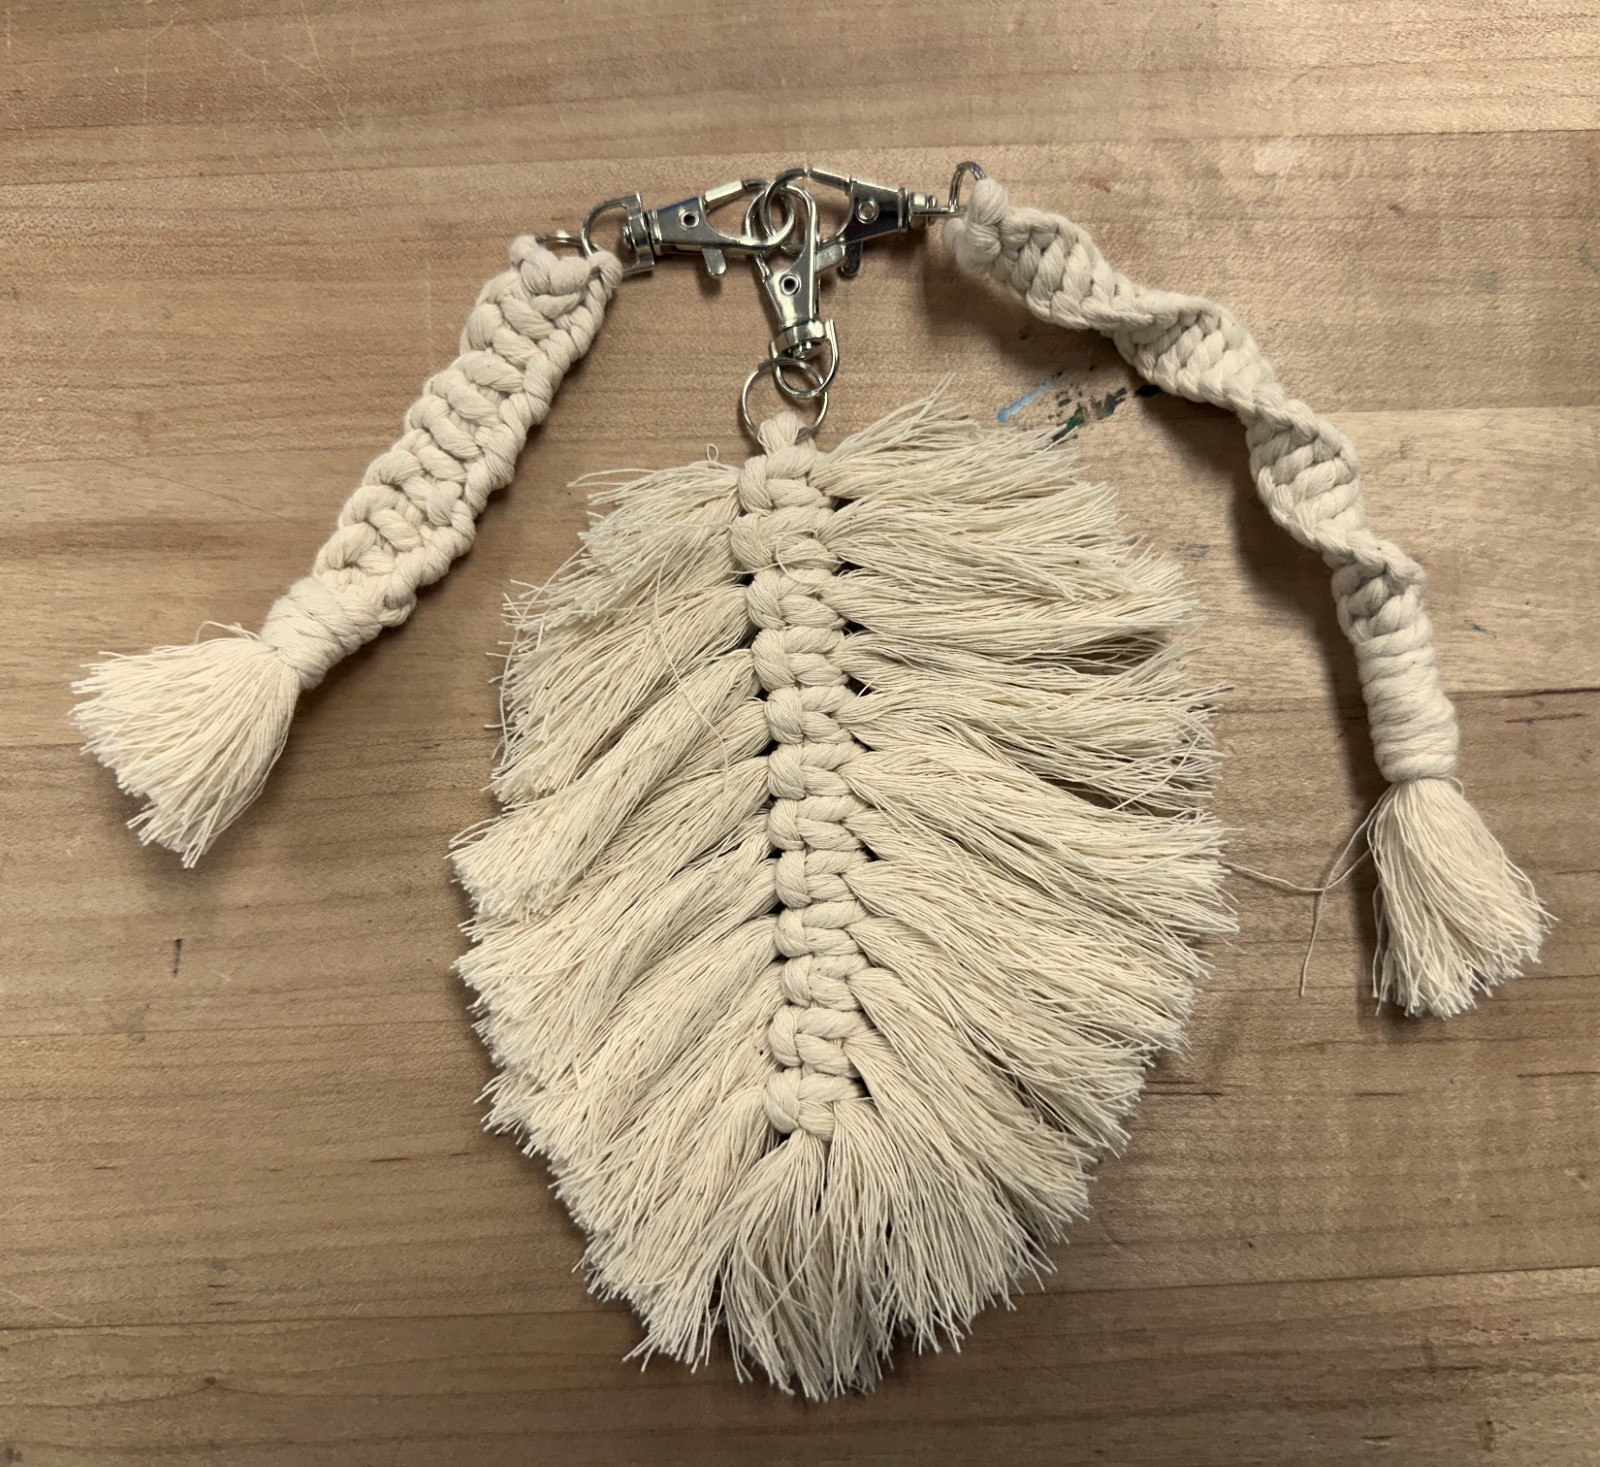 A keychain made with the macrame kit